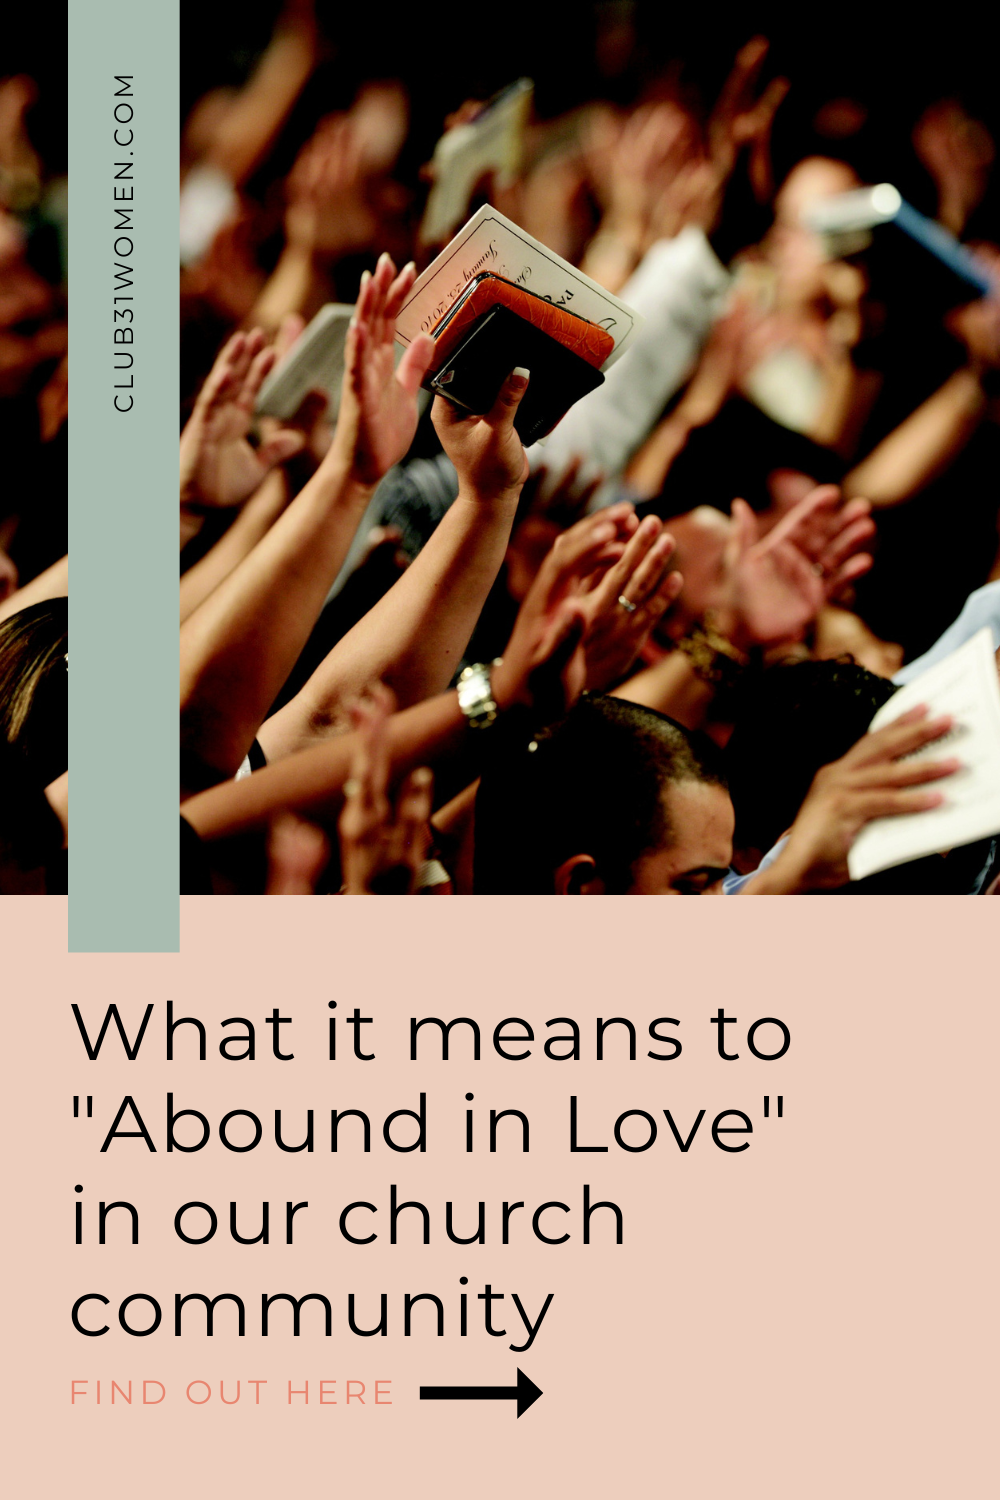 Abounding in Love: A Call to Grow in Sacrificial Love for Your Church Community via @Club31Women